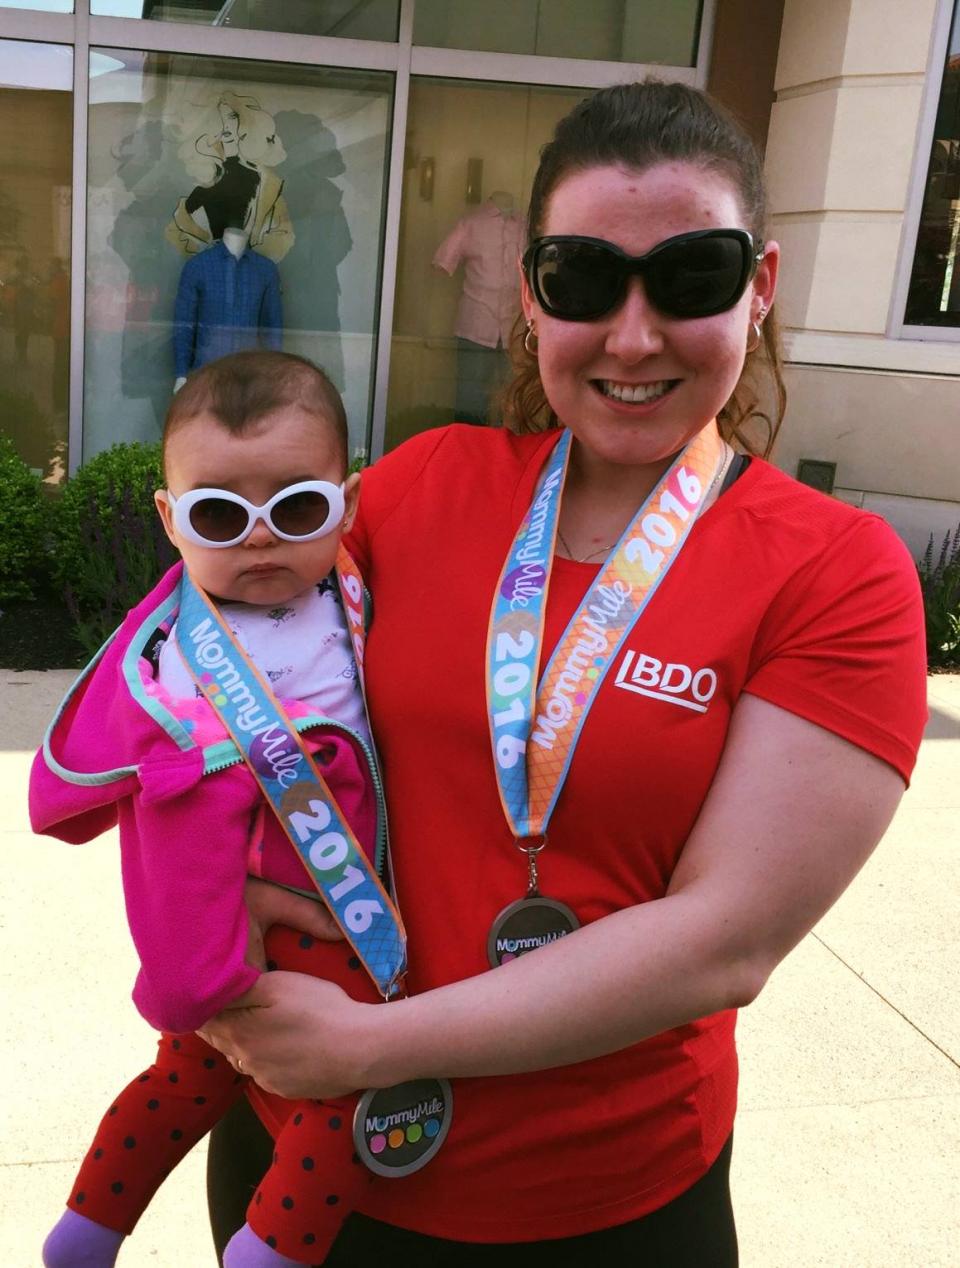 BDO professional’s first race with her daughter. They completed the Mommy Mile together. 